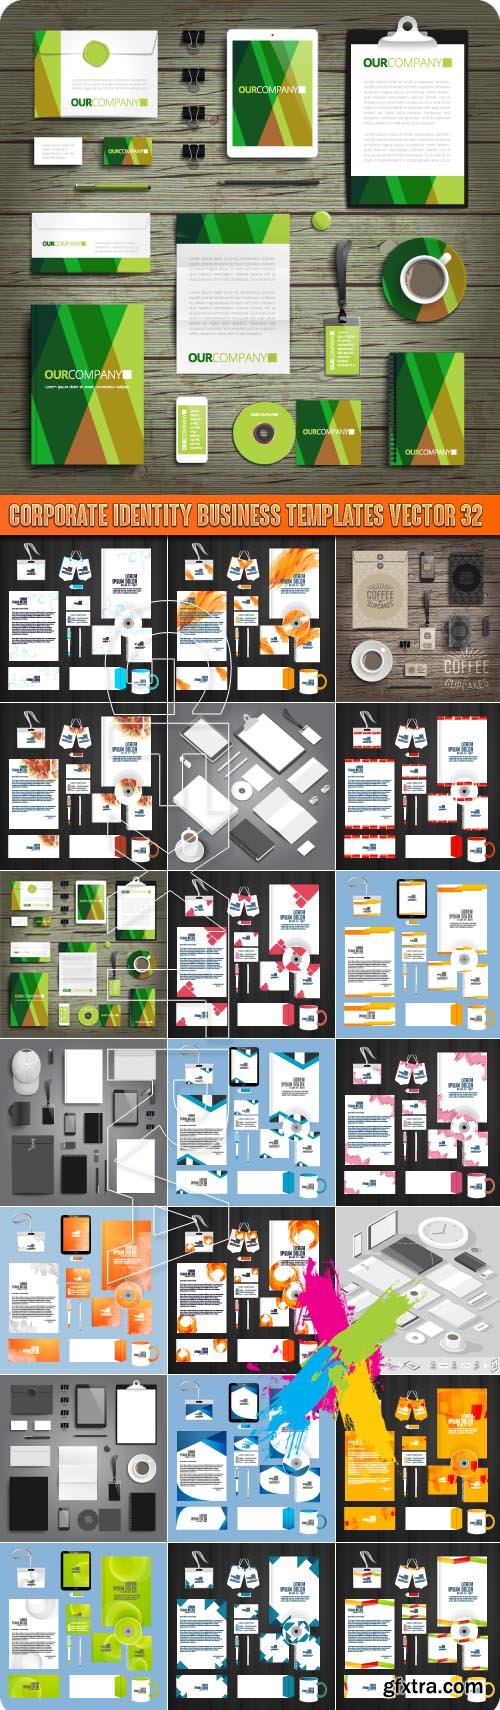 Corporate identity business templates vector 32